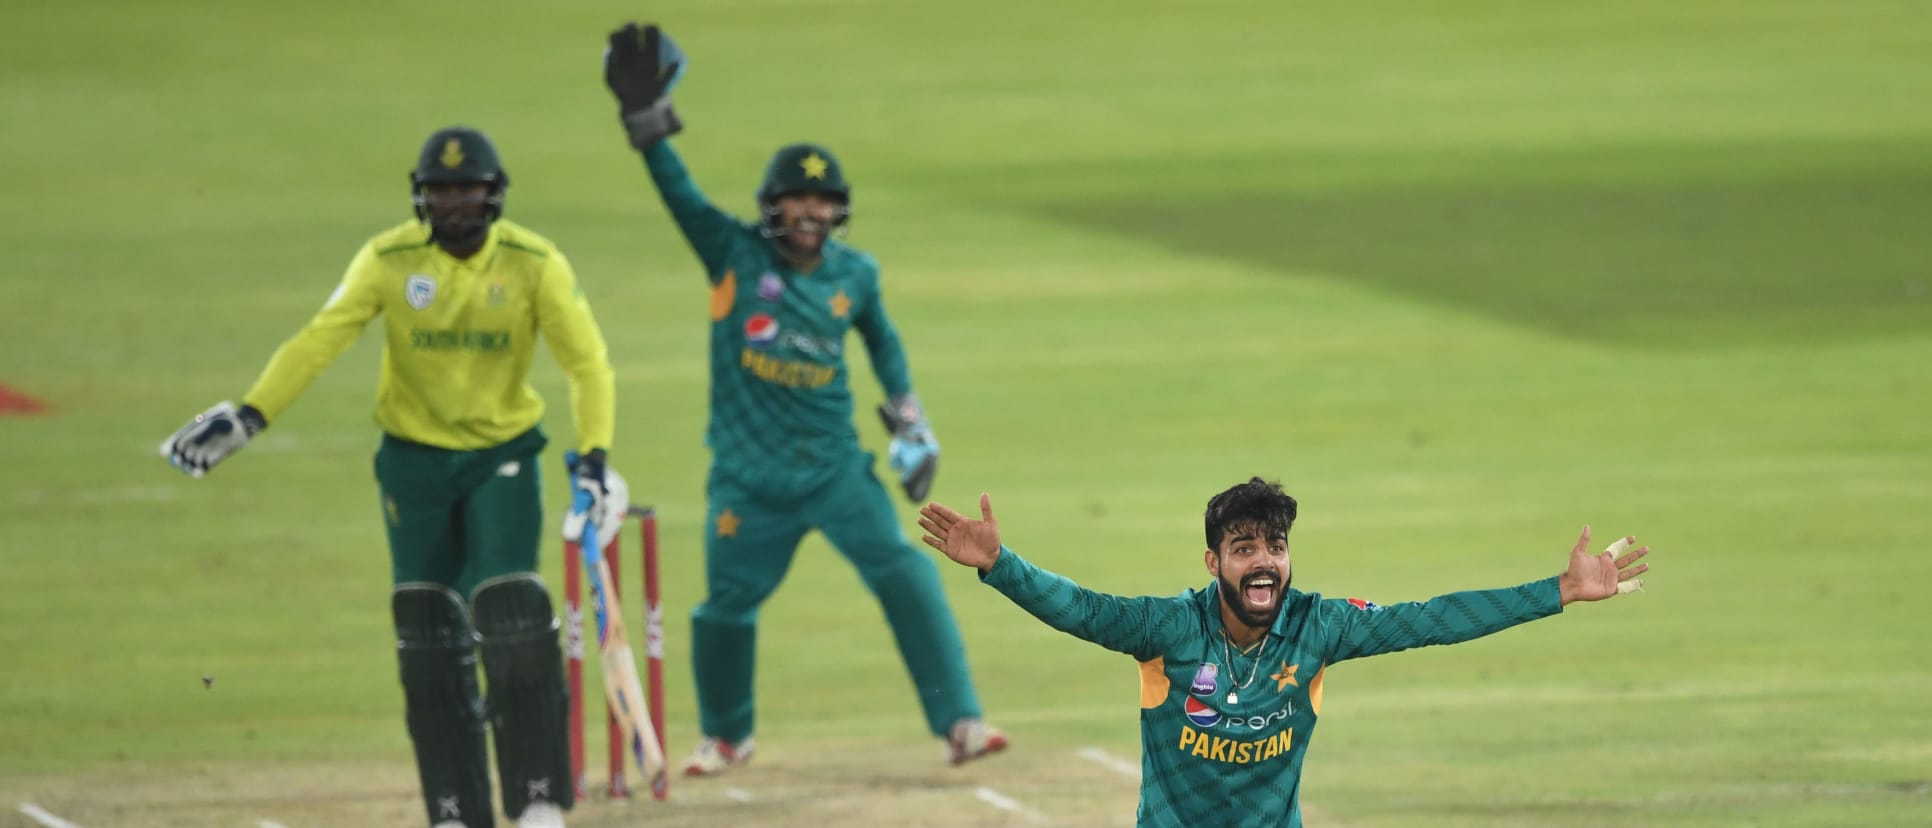 Shadab Khan appeals for a wicket